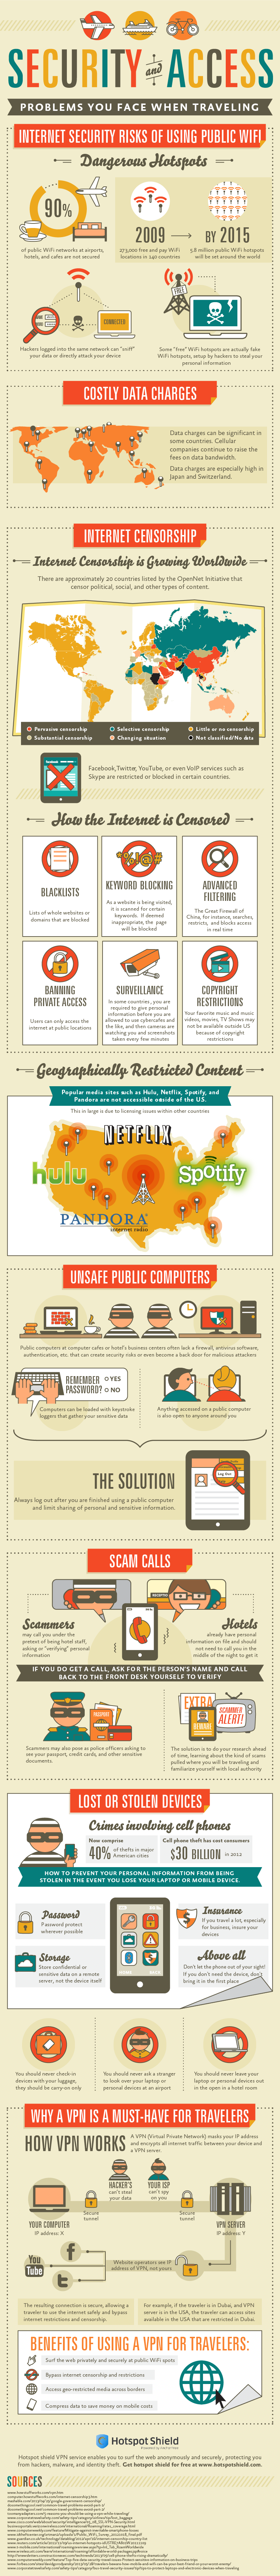 Travel security and web access issues Infographic